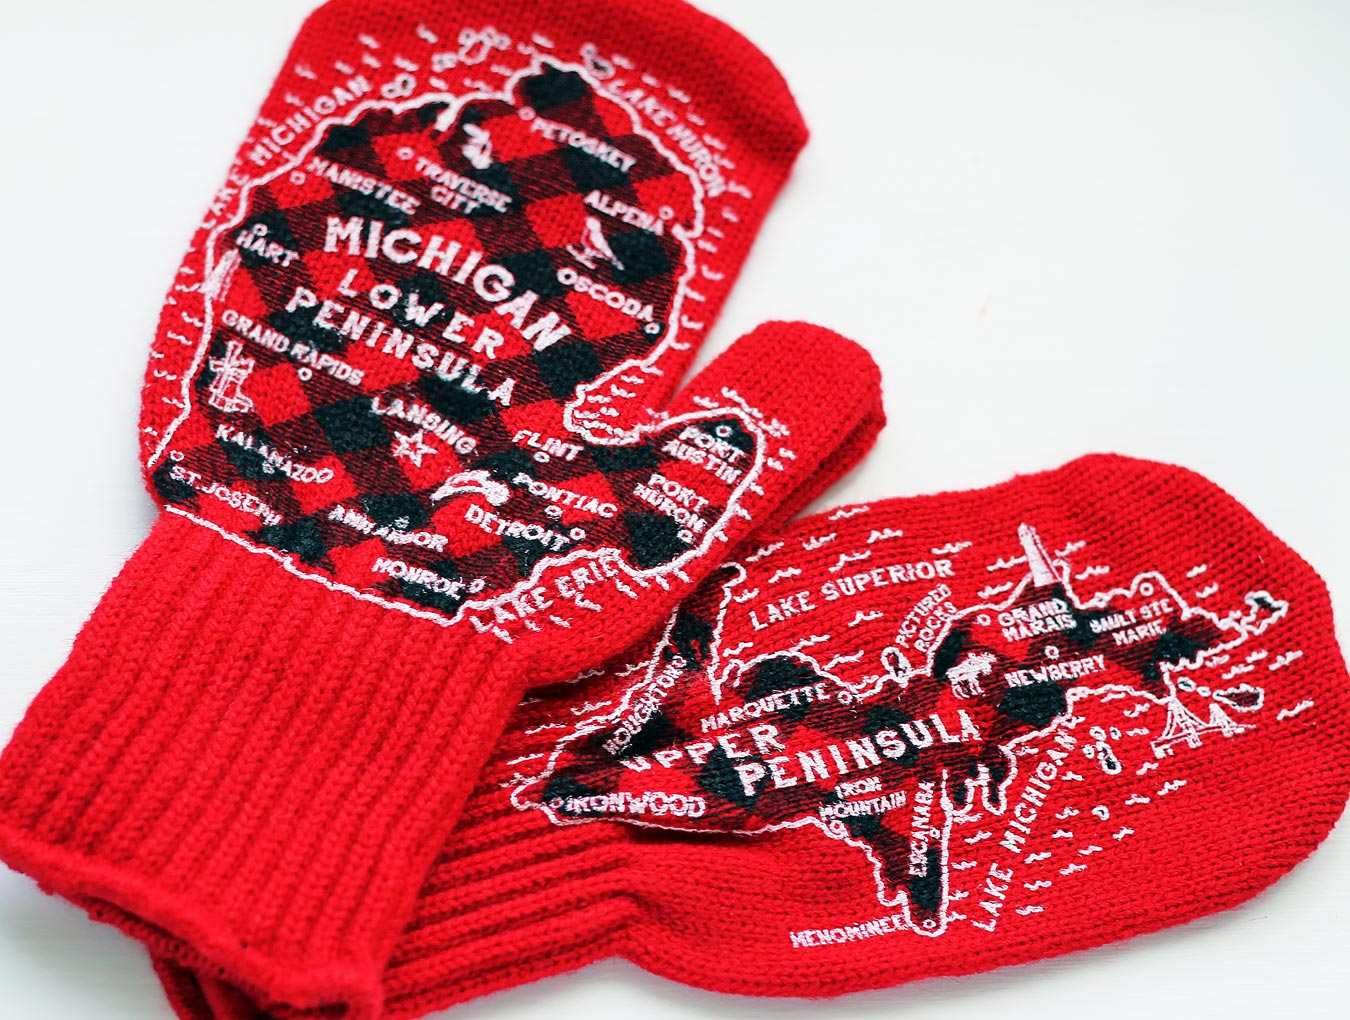 Limited Edition Hunter's Plaid Mittens // 4 Fun Gift Ideas From Michigan Mittens  (via Wading in Big Shoes)